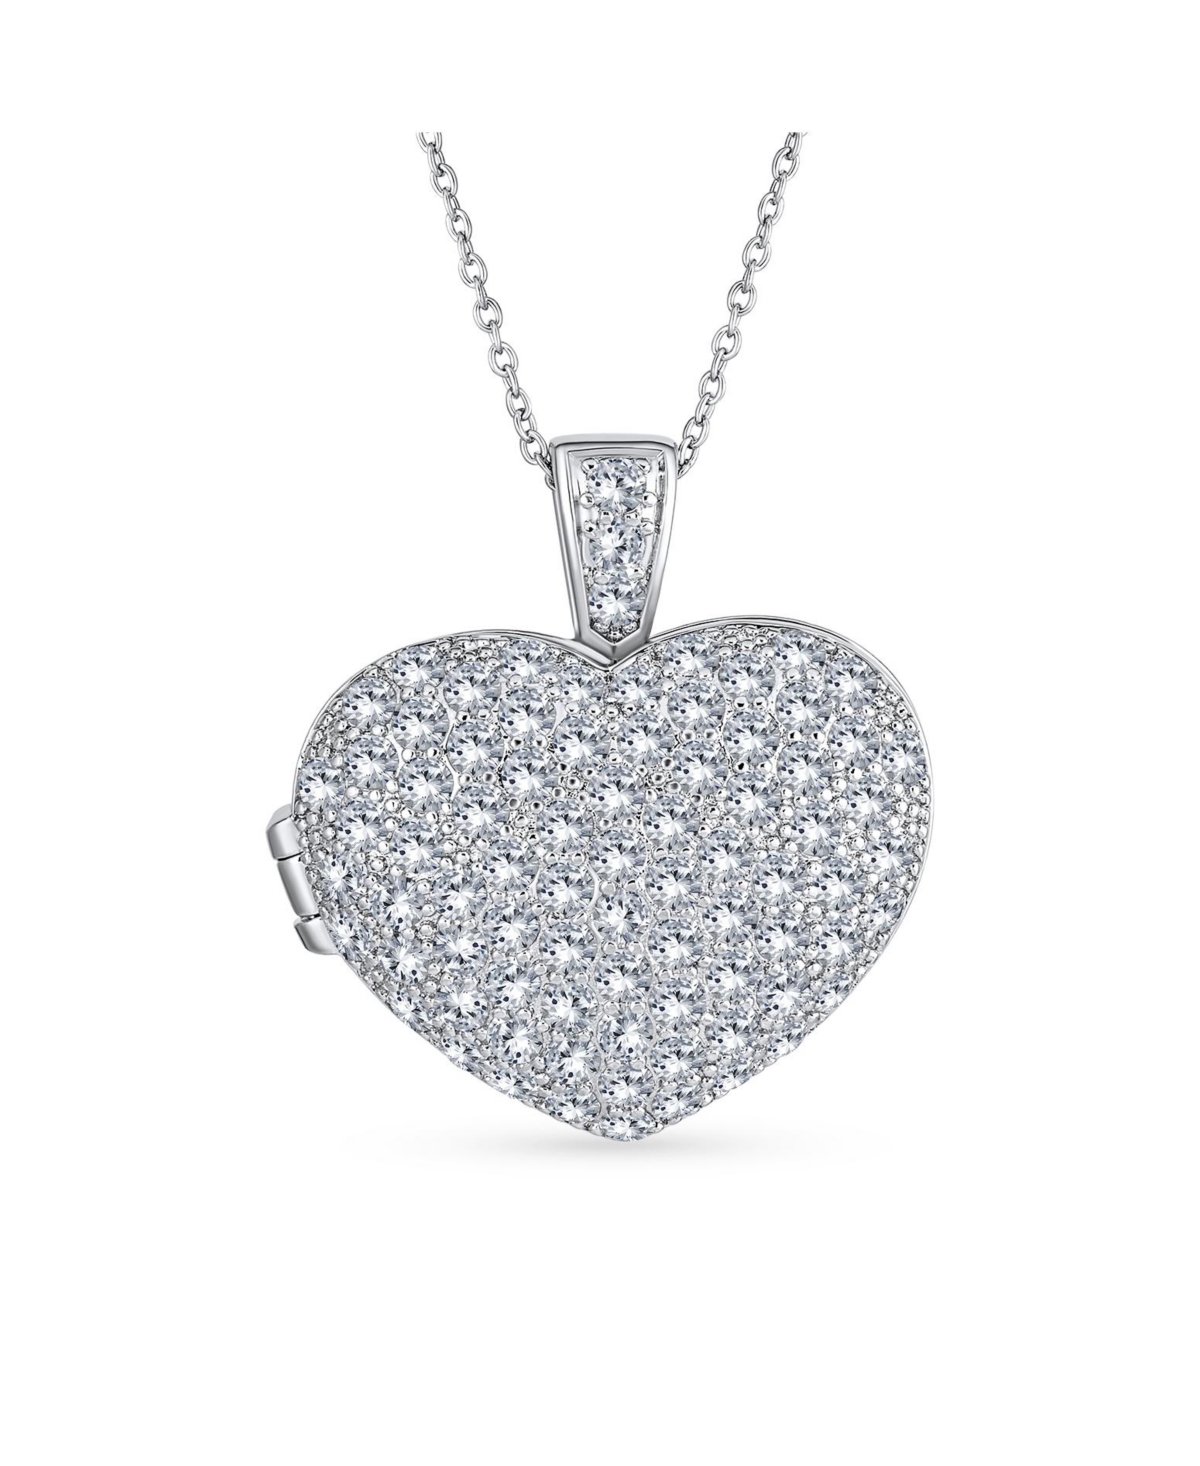 Large Pave Cz Puff Heart Shape Aromatherapy Essential Oil Perfume Diffuser Locket Pendant Necklace For Women For Teen - Silver